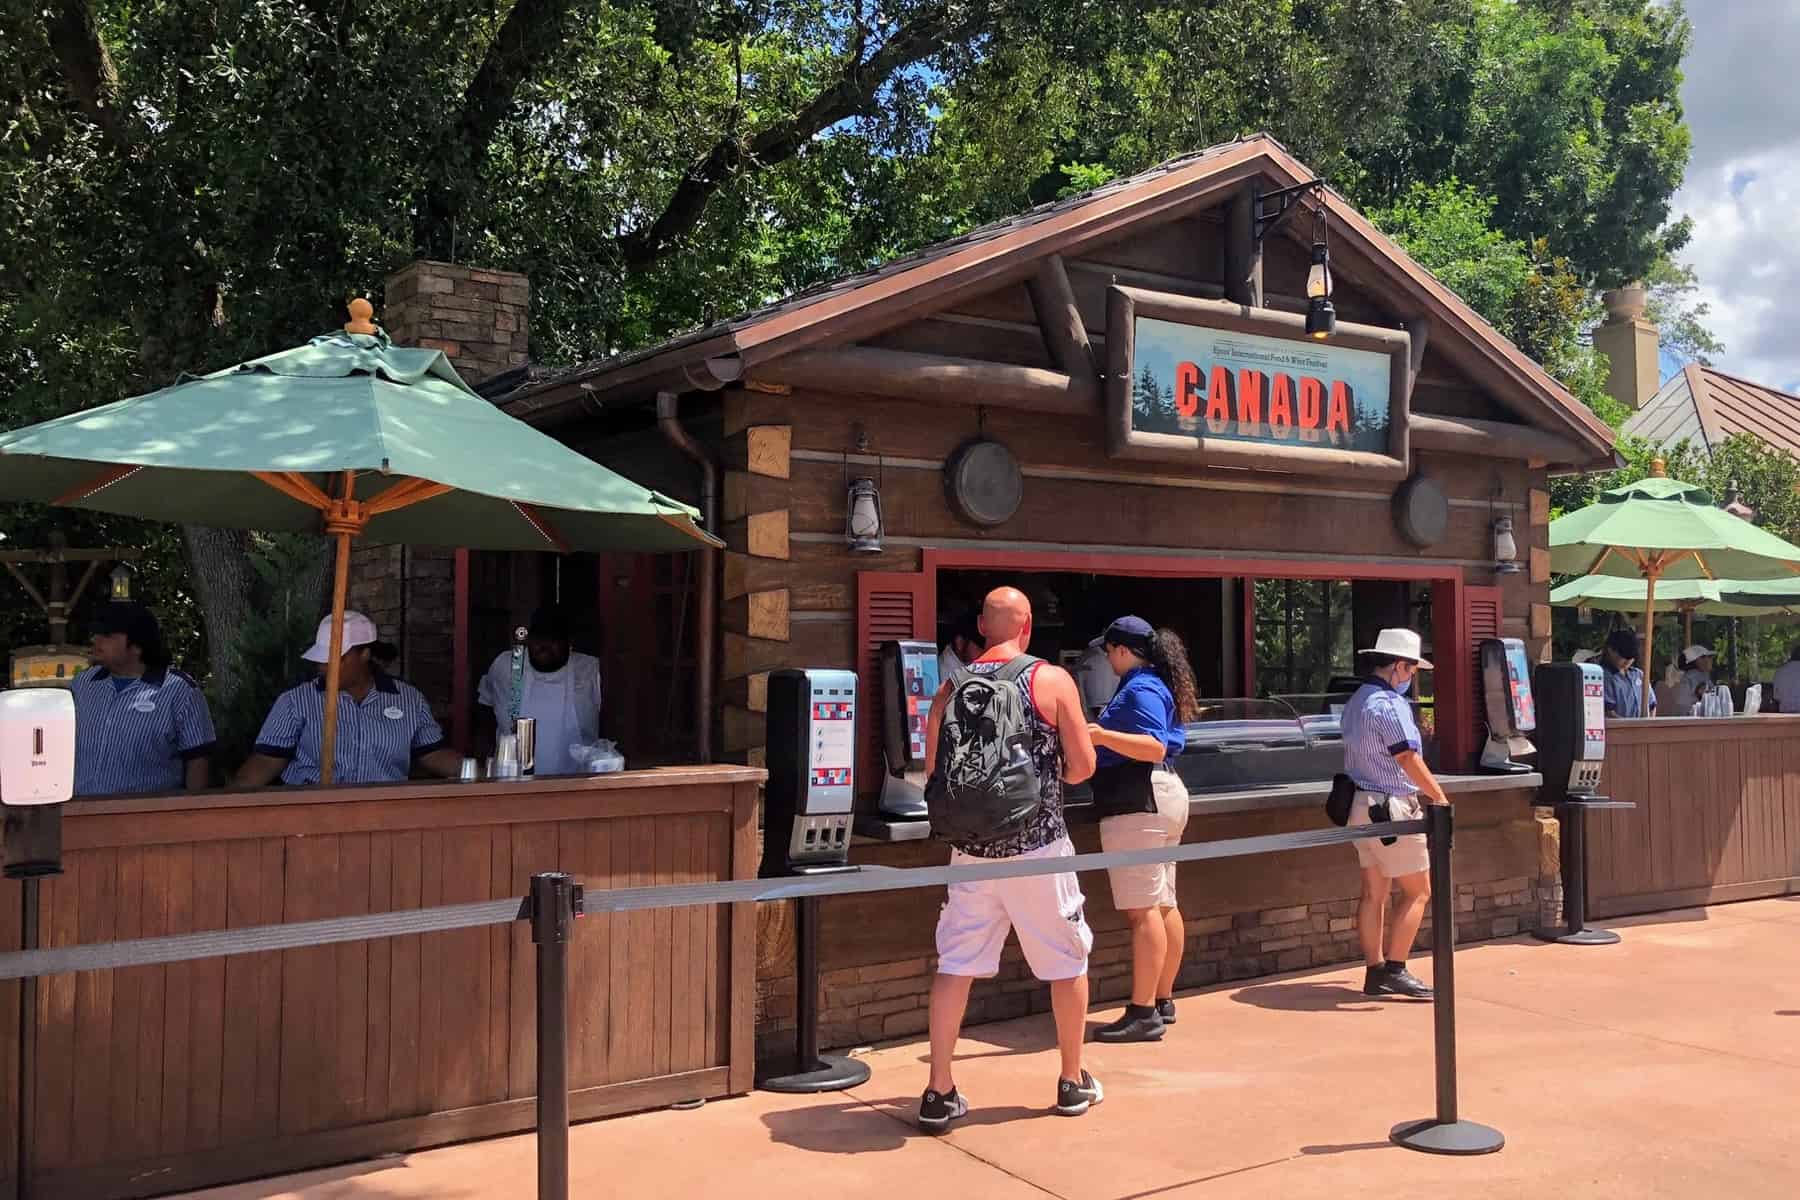 Canada Booth Menu & Review (2021 Epcot Food & Wine Festival)